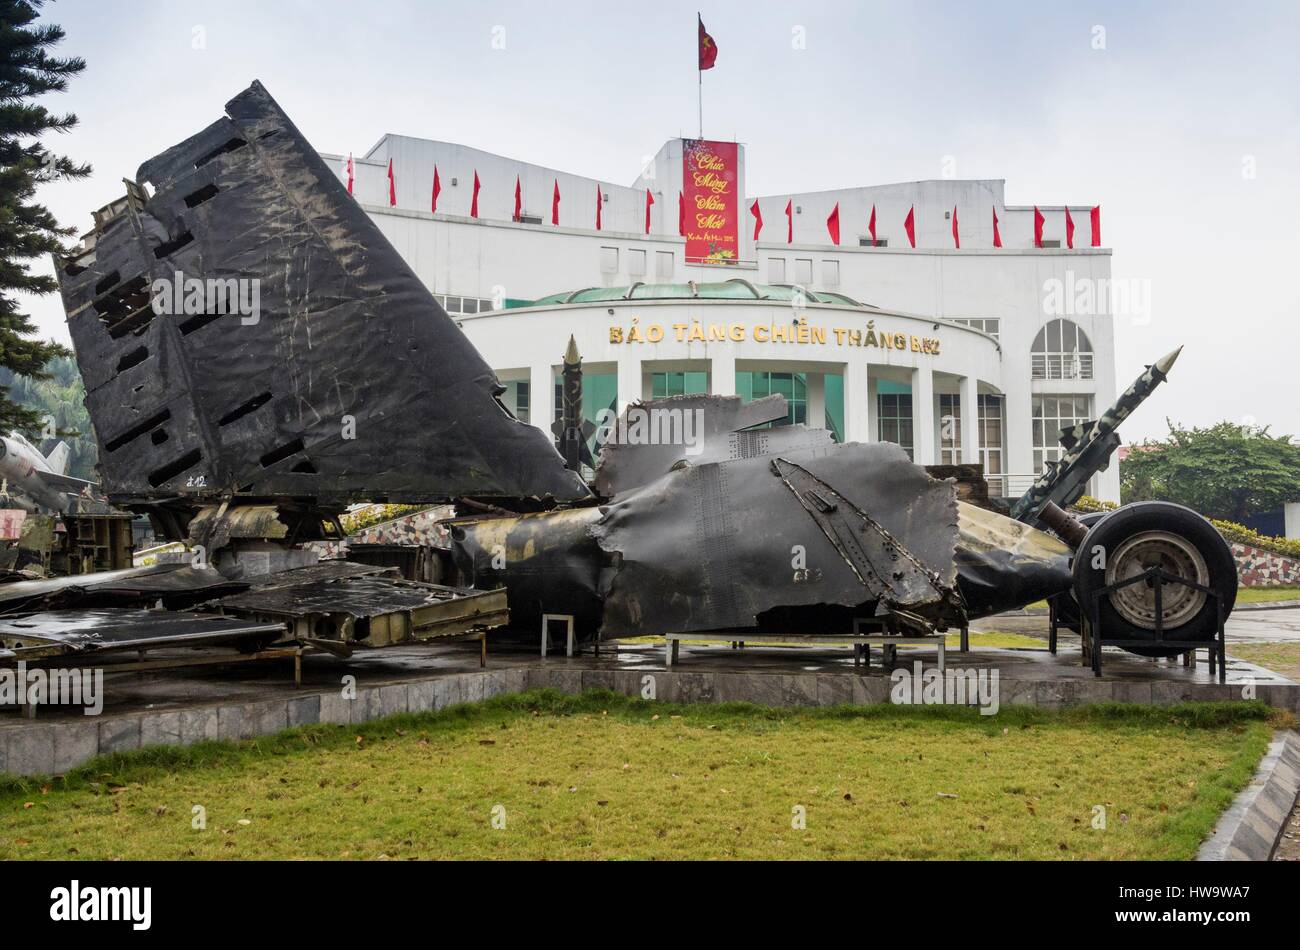 Vietnam, Hanoi, B-52 Victory Museum, exterior with wreck of US Air Force B-52 momber Stock Photo